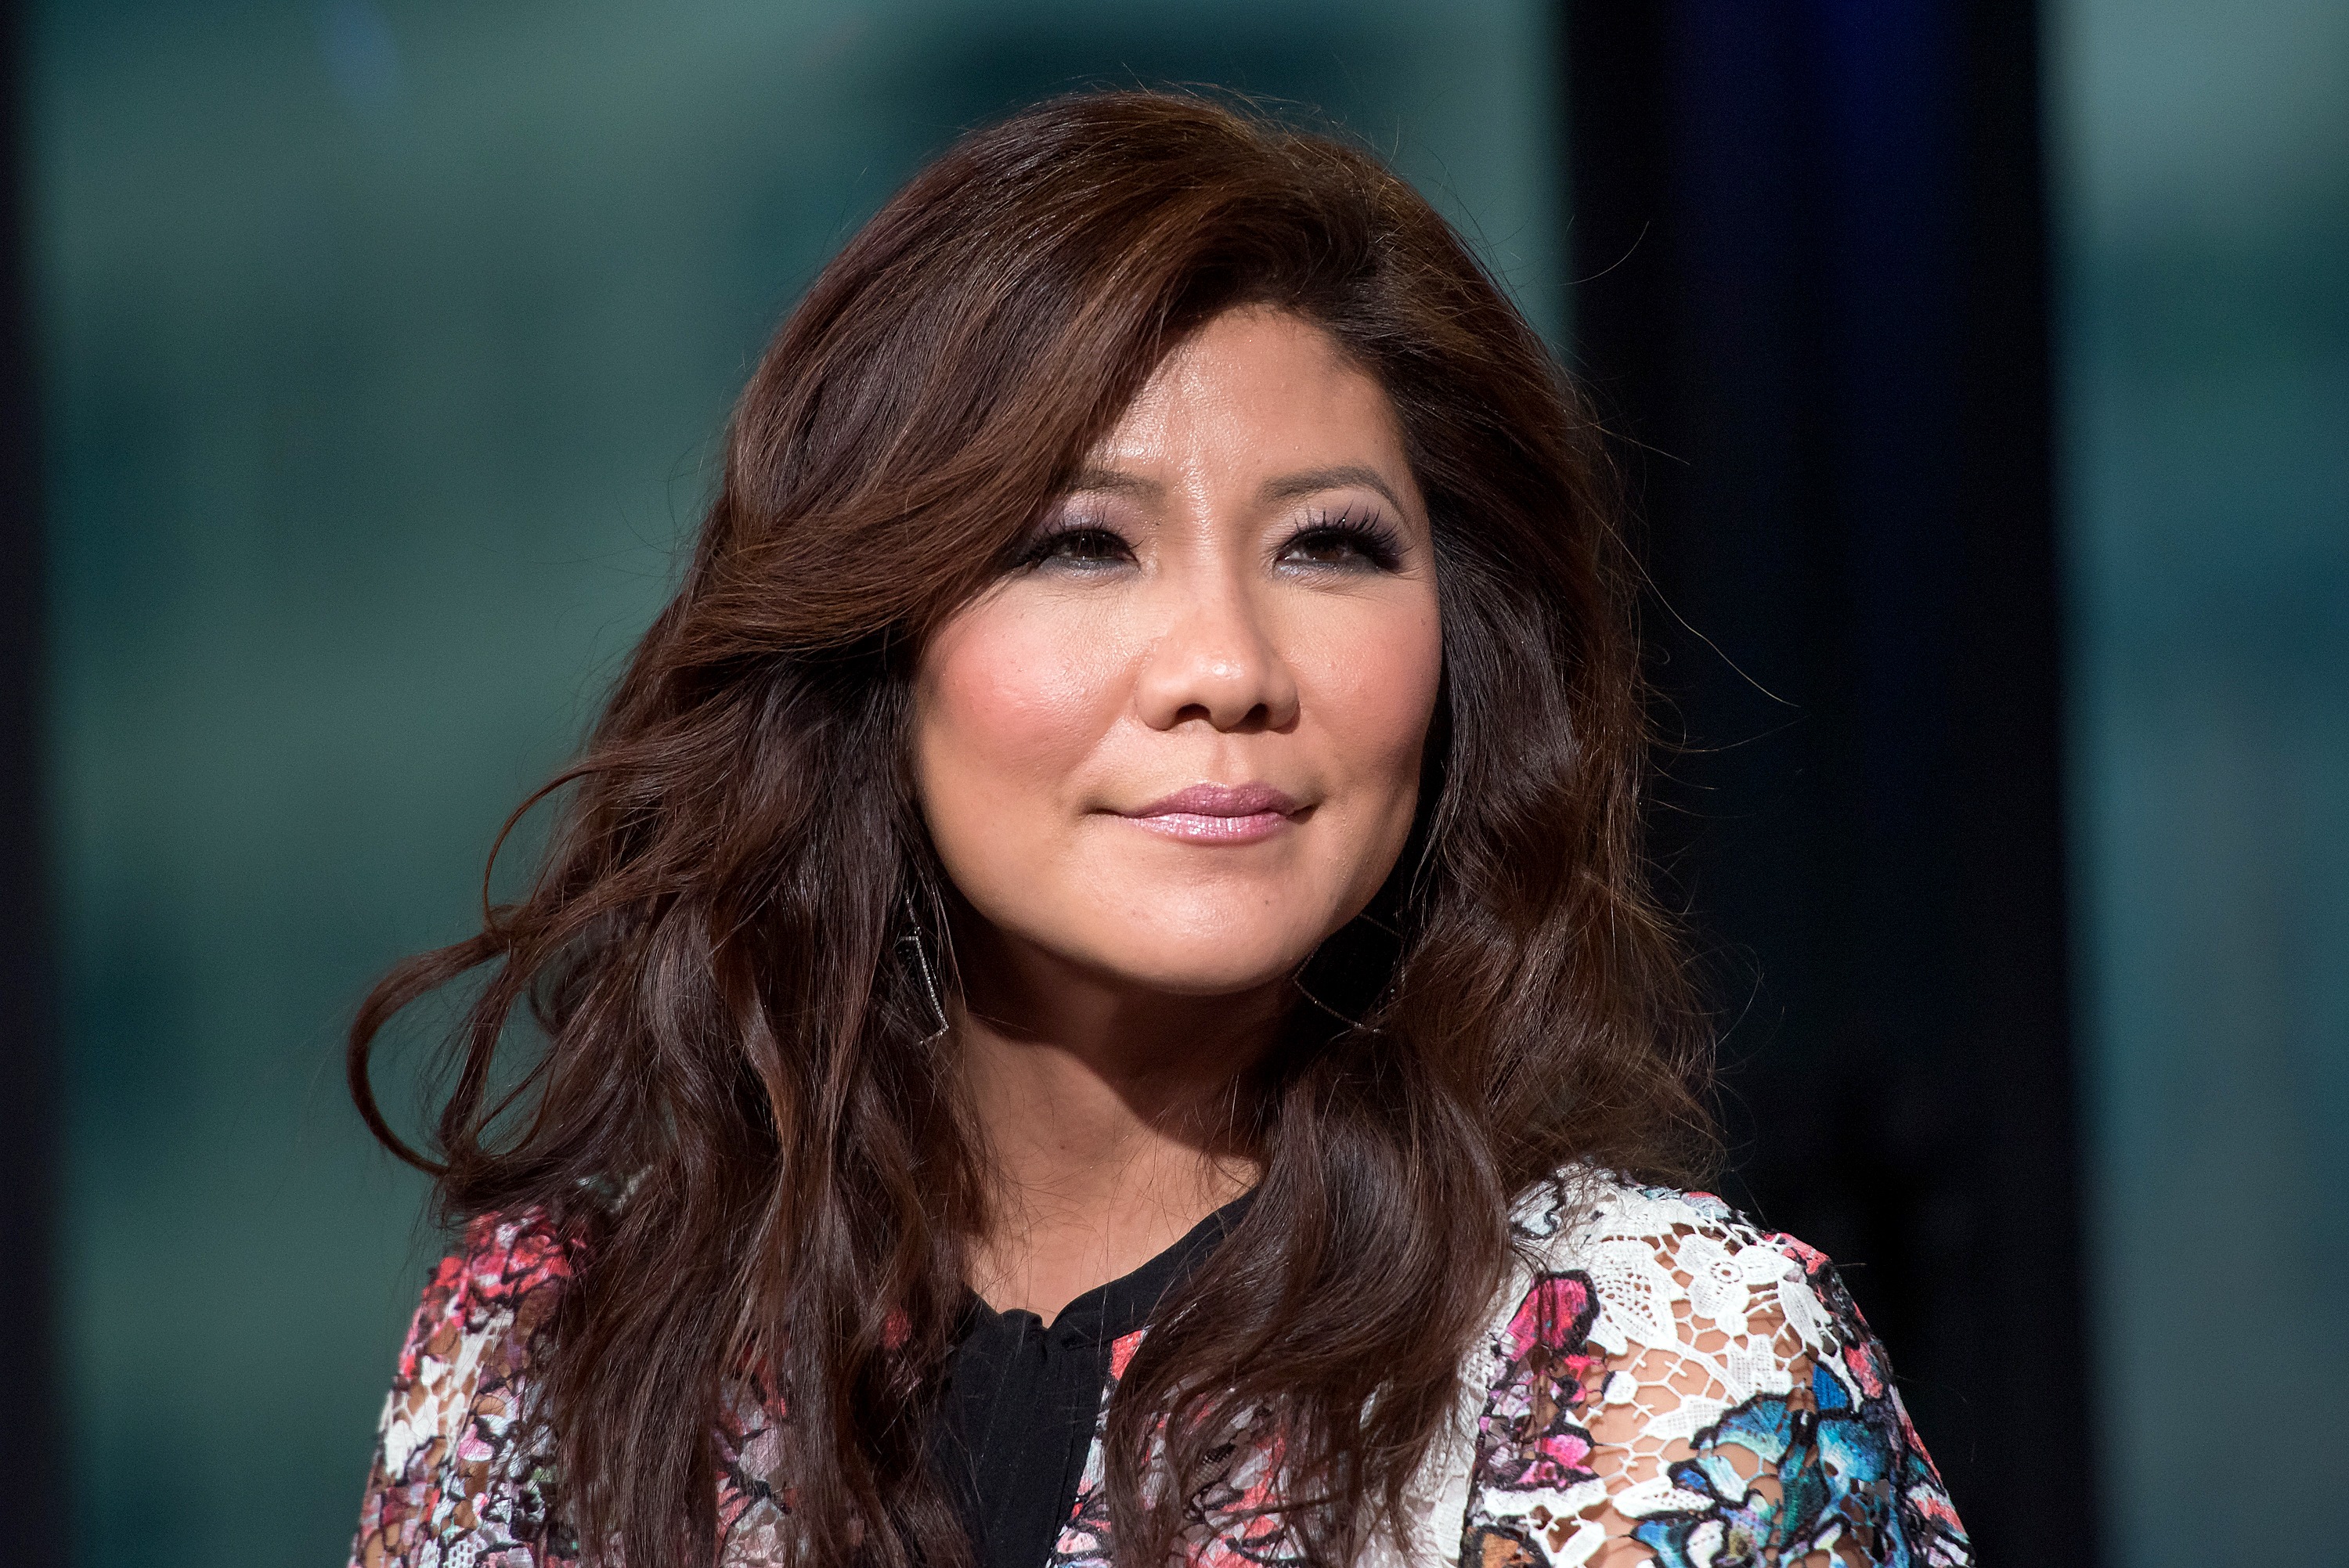 Julie Chen Is At A 'Crossroads' After 'The Talk' Exit (Exclusive)